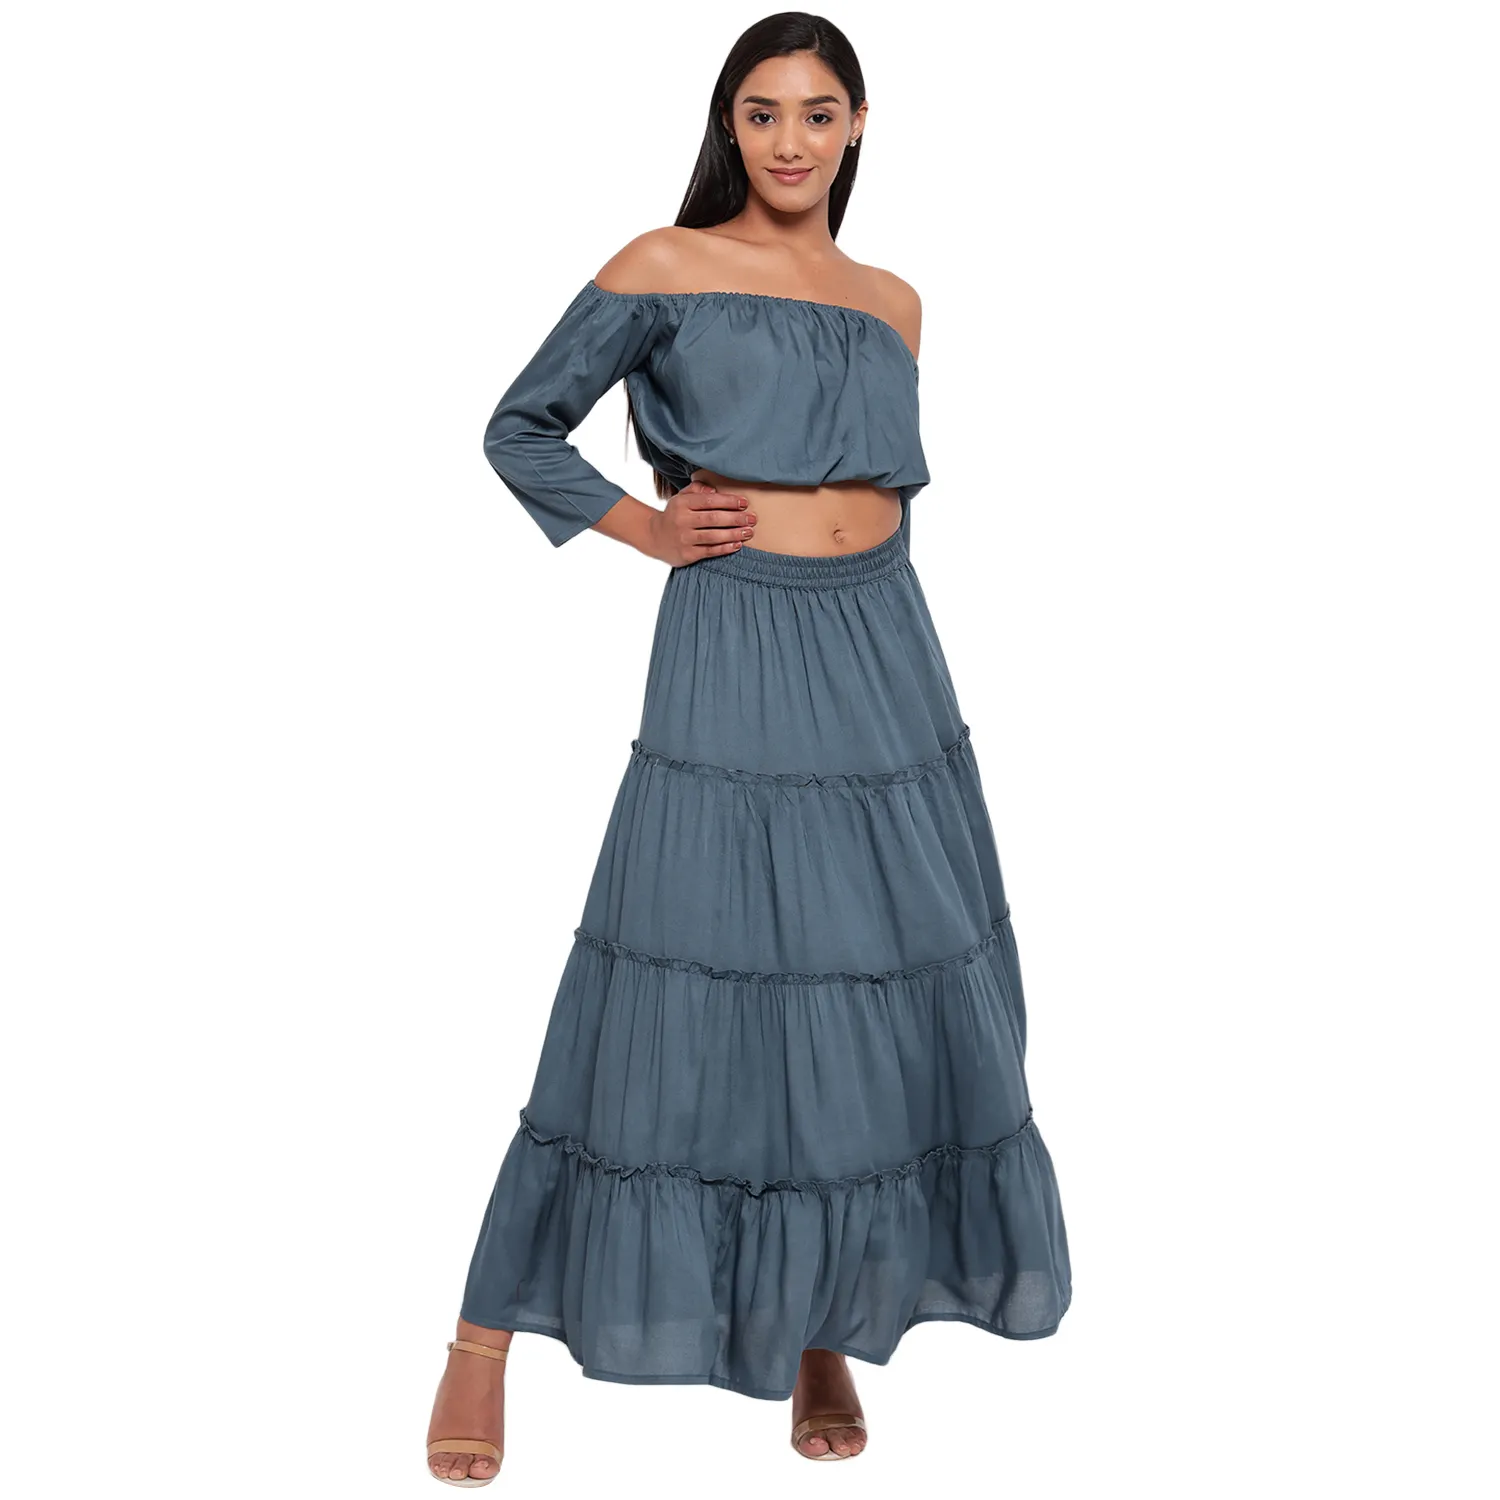 Women's Rayon Solid Grey Skirt Top Set Two Piece Prom Smoked Dress with Long Sleeves (AM083)